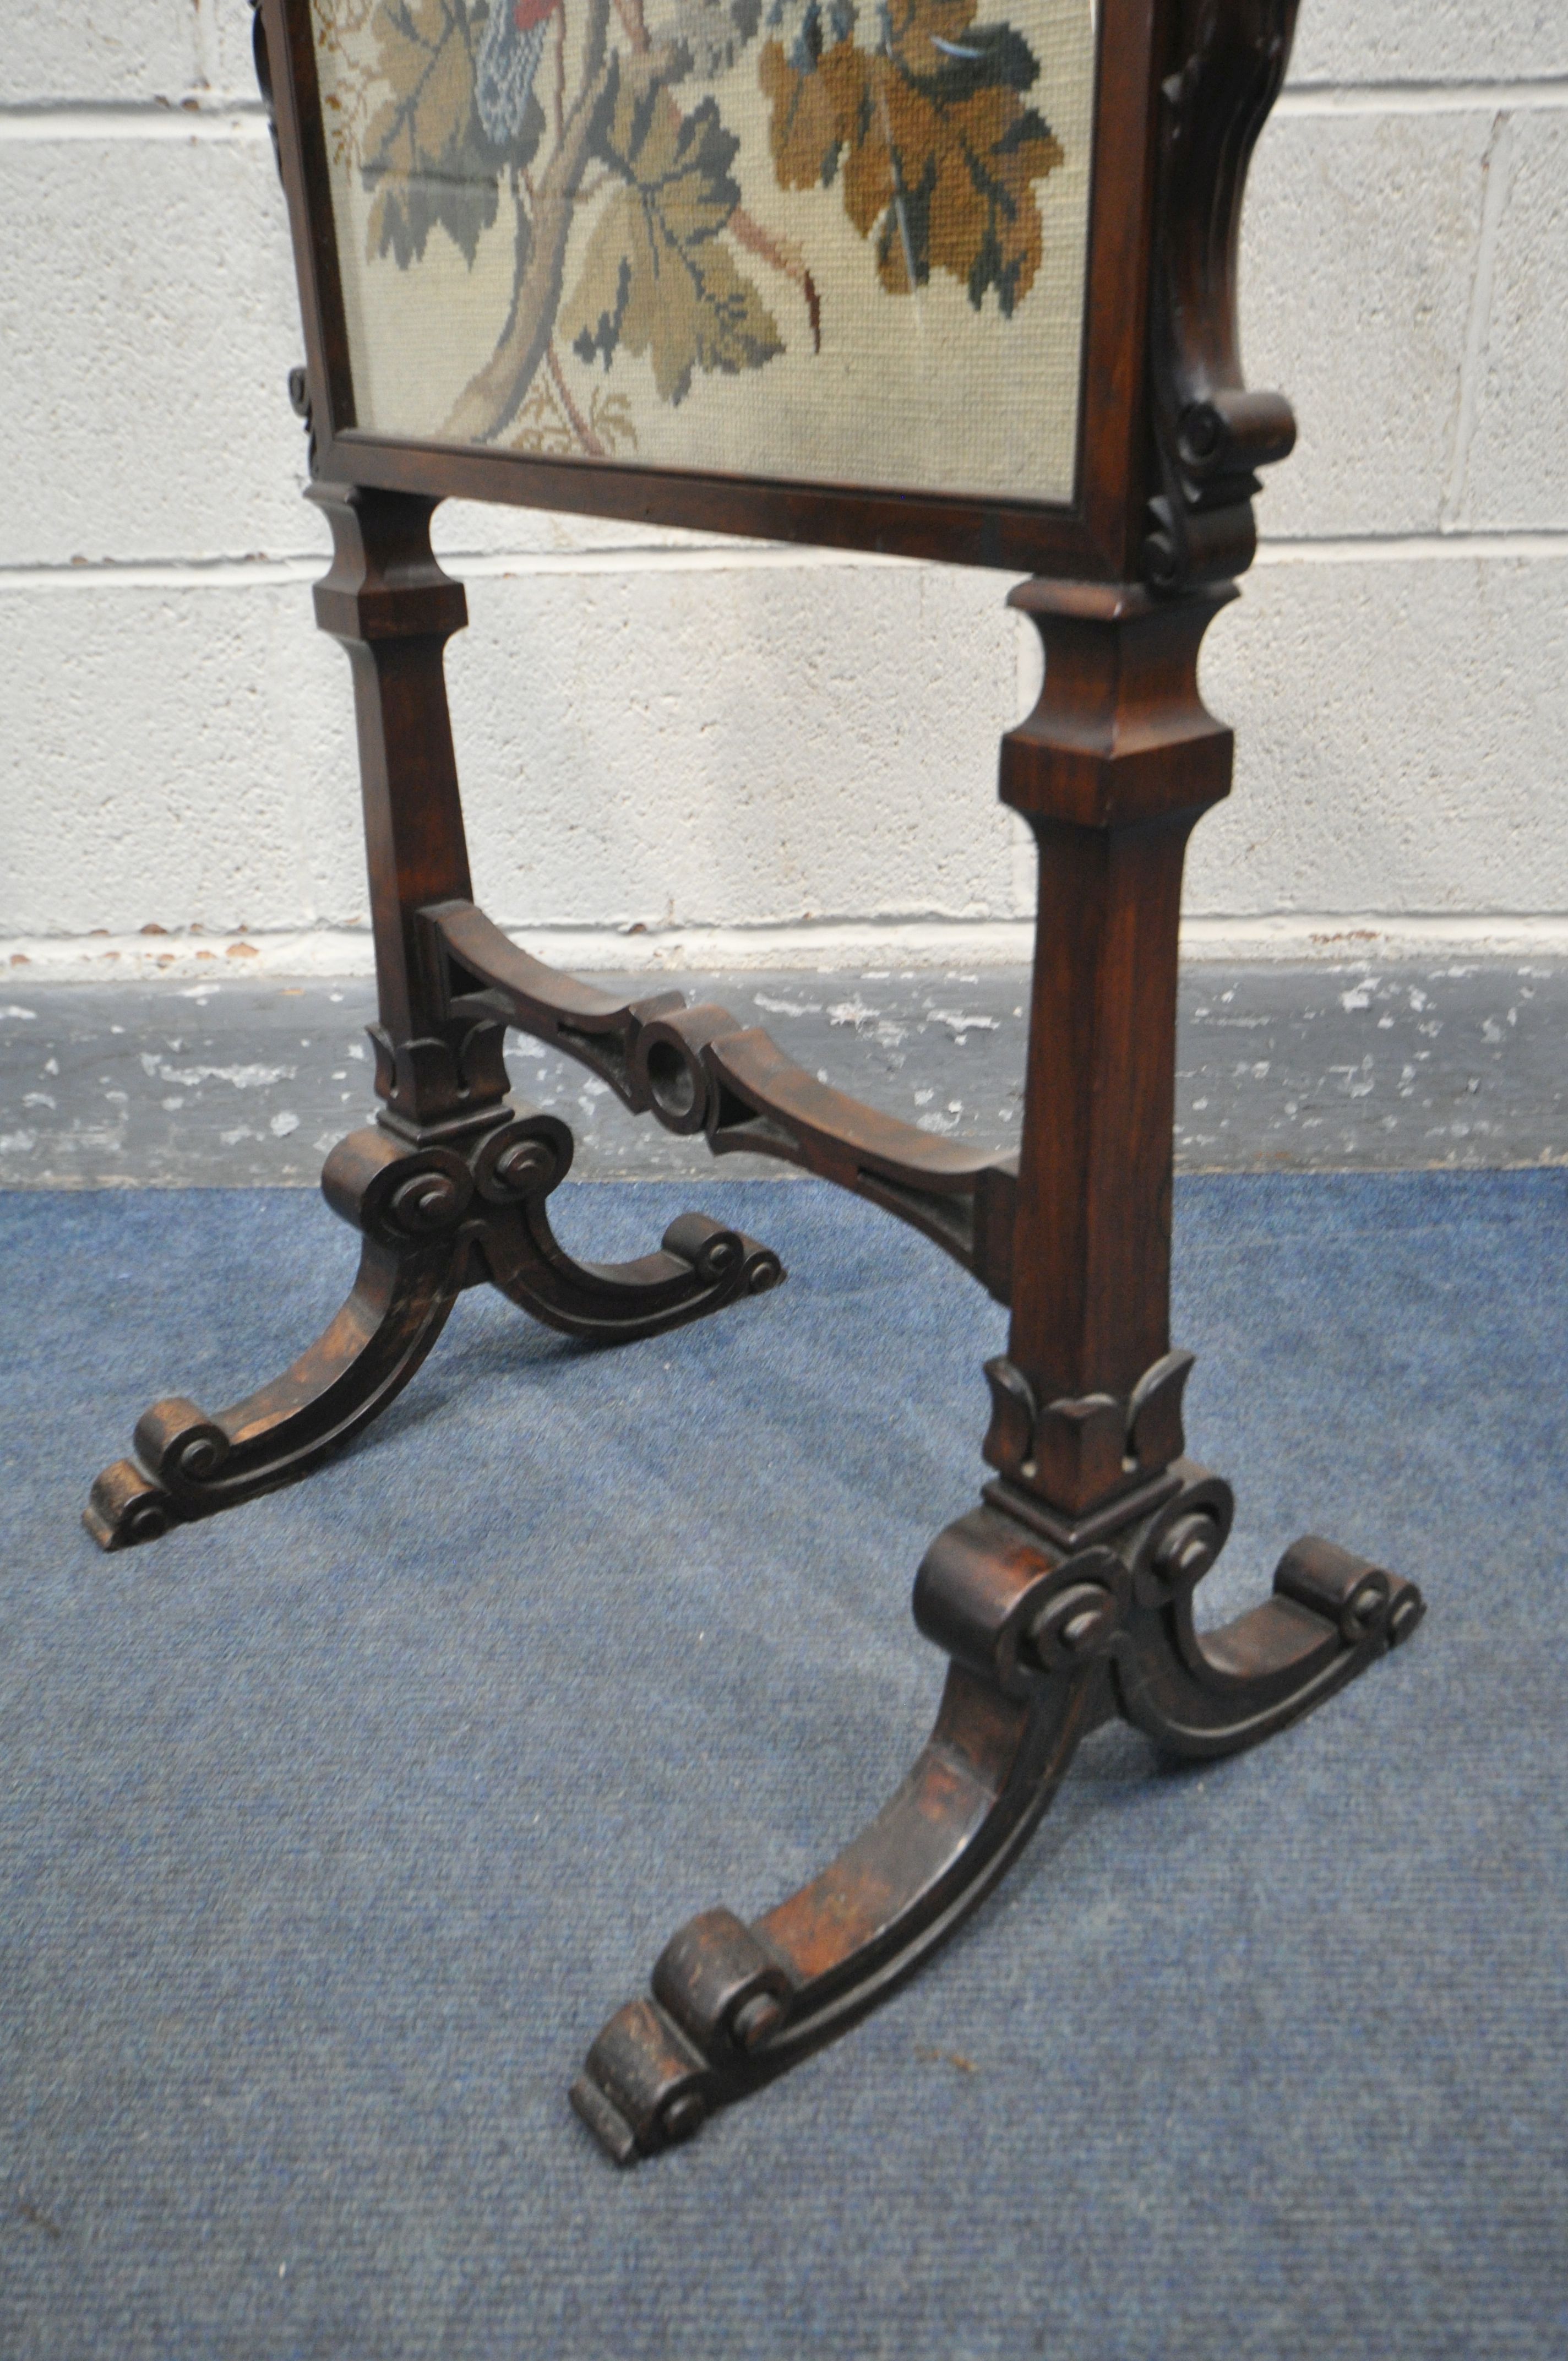 AN EARLY VICTORIAN ROSEWOOD FIRESCREEN, the frame with foliate scrolls, the glass panel enclosing - Image 4 of 5